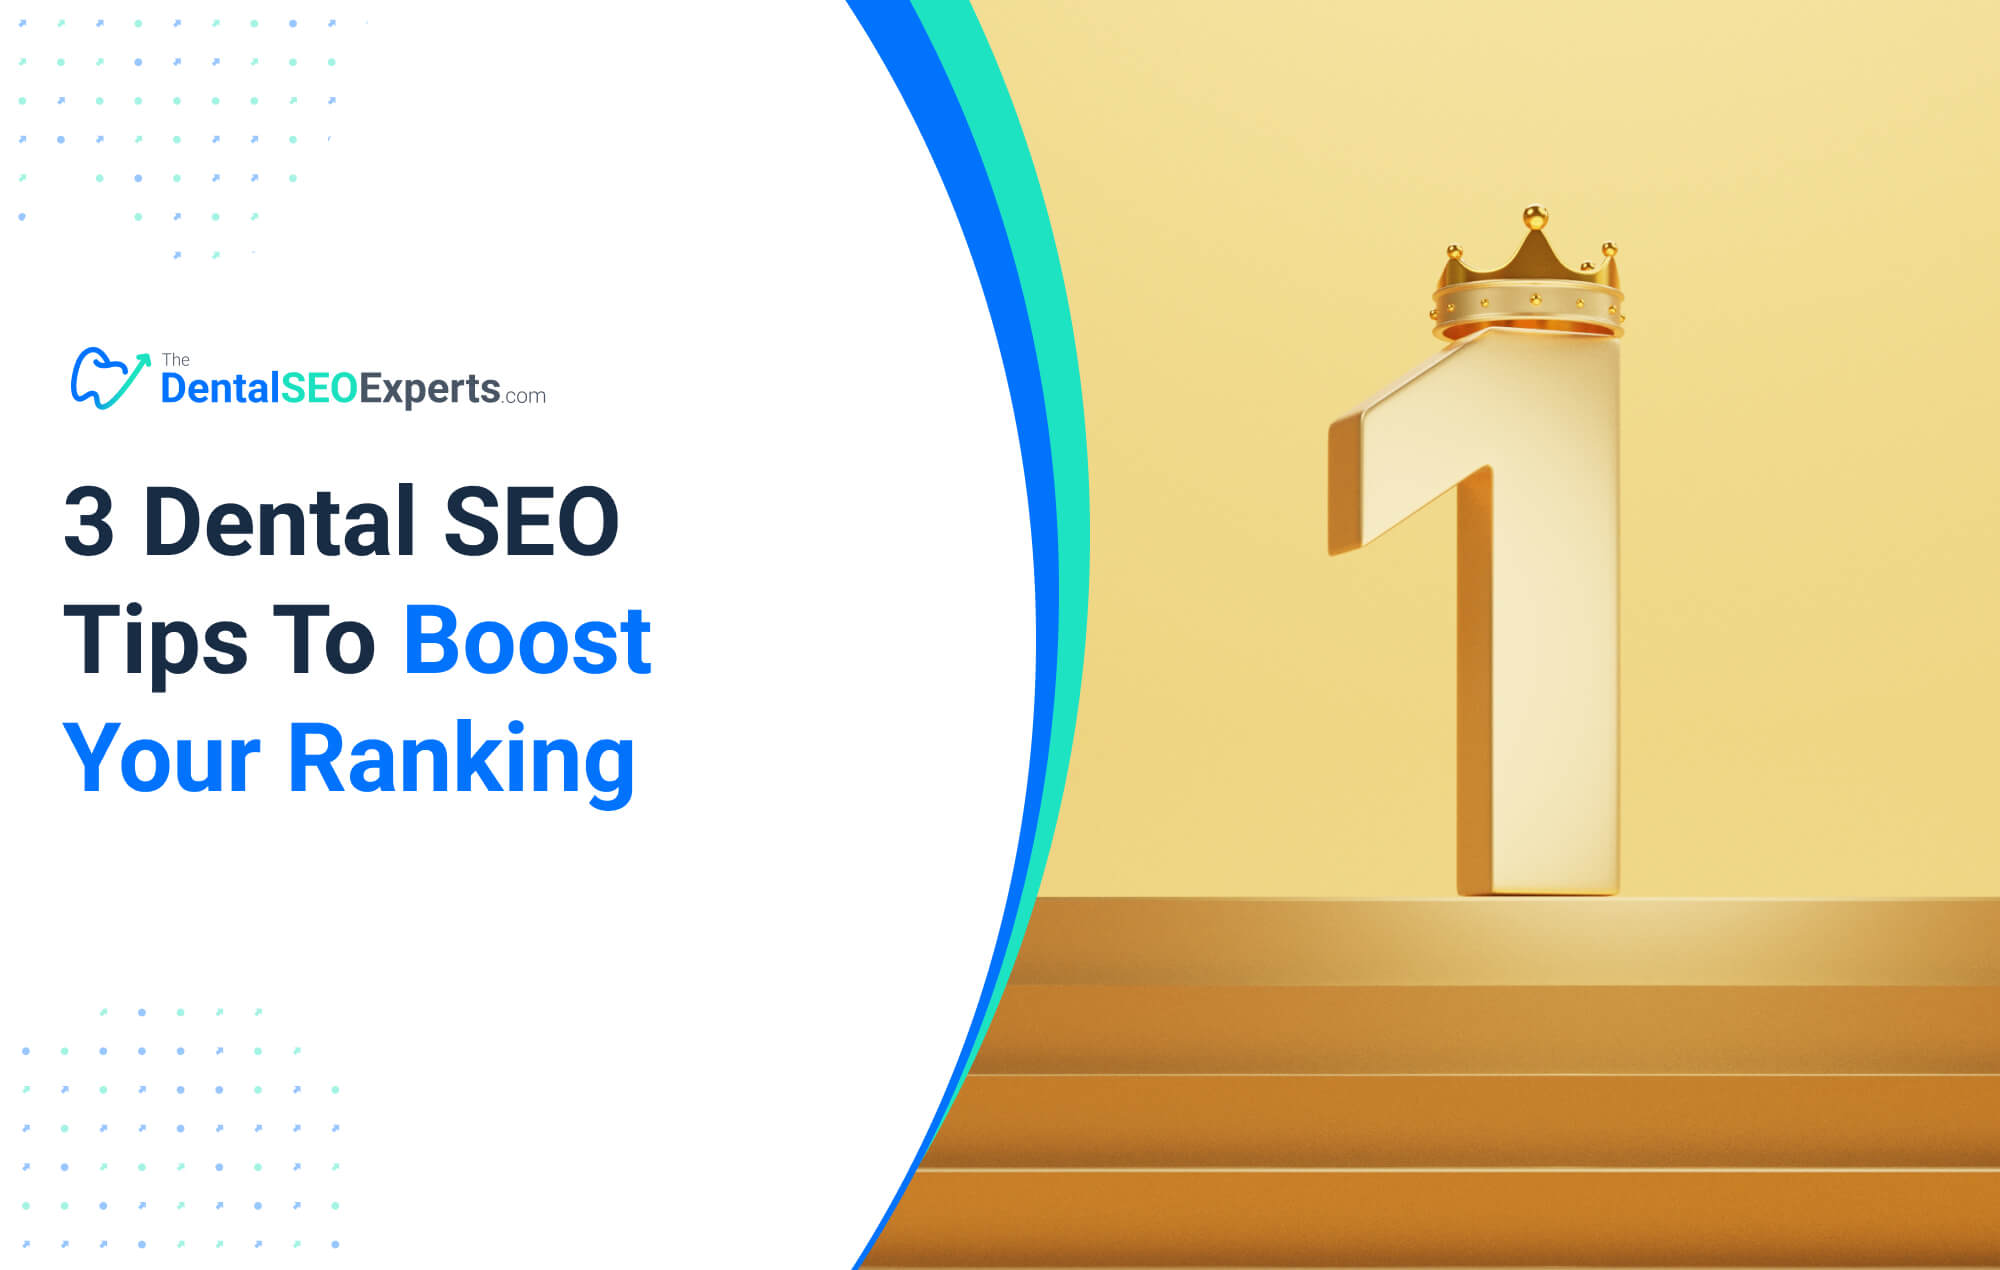 3 Dental SEO Tips To Boost Your Ranking